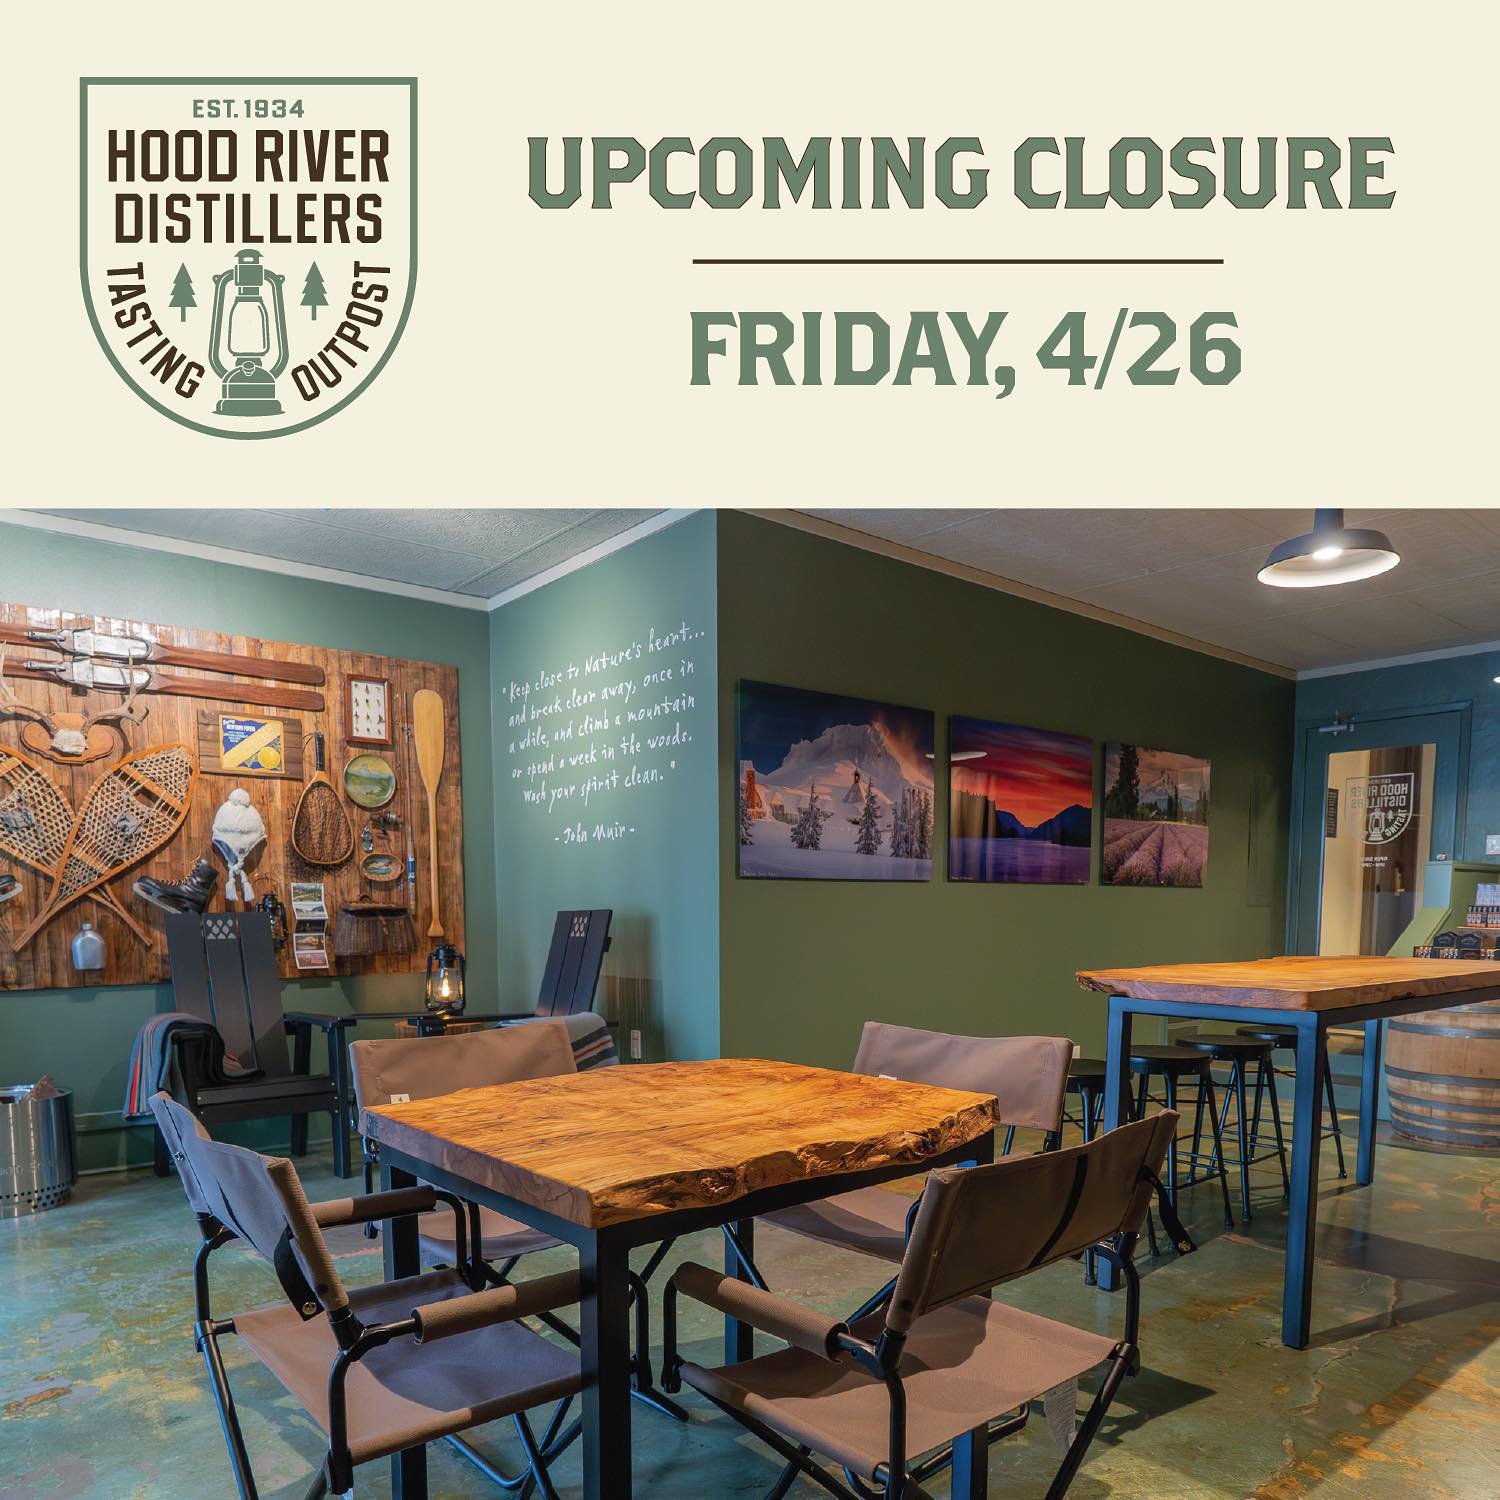 Our apologies, but due to insufficient staffing, the Portland Tasting Outpost will be closed on Friday, April 26th.

Please call the Tasting Outpost at 503.545.8906 or check our updated hours on Google ahead of visiting. Our Hood River Tasting Room l